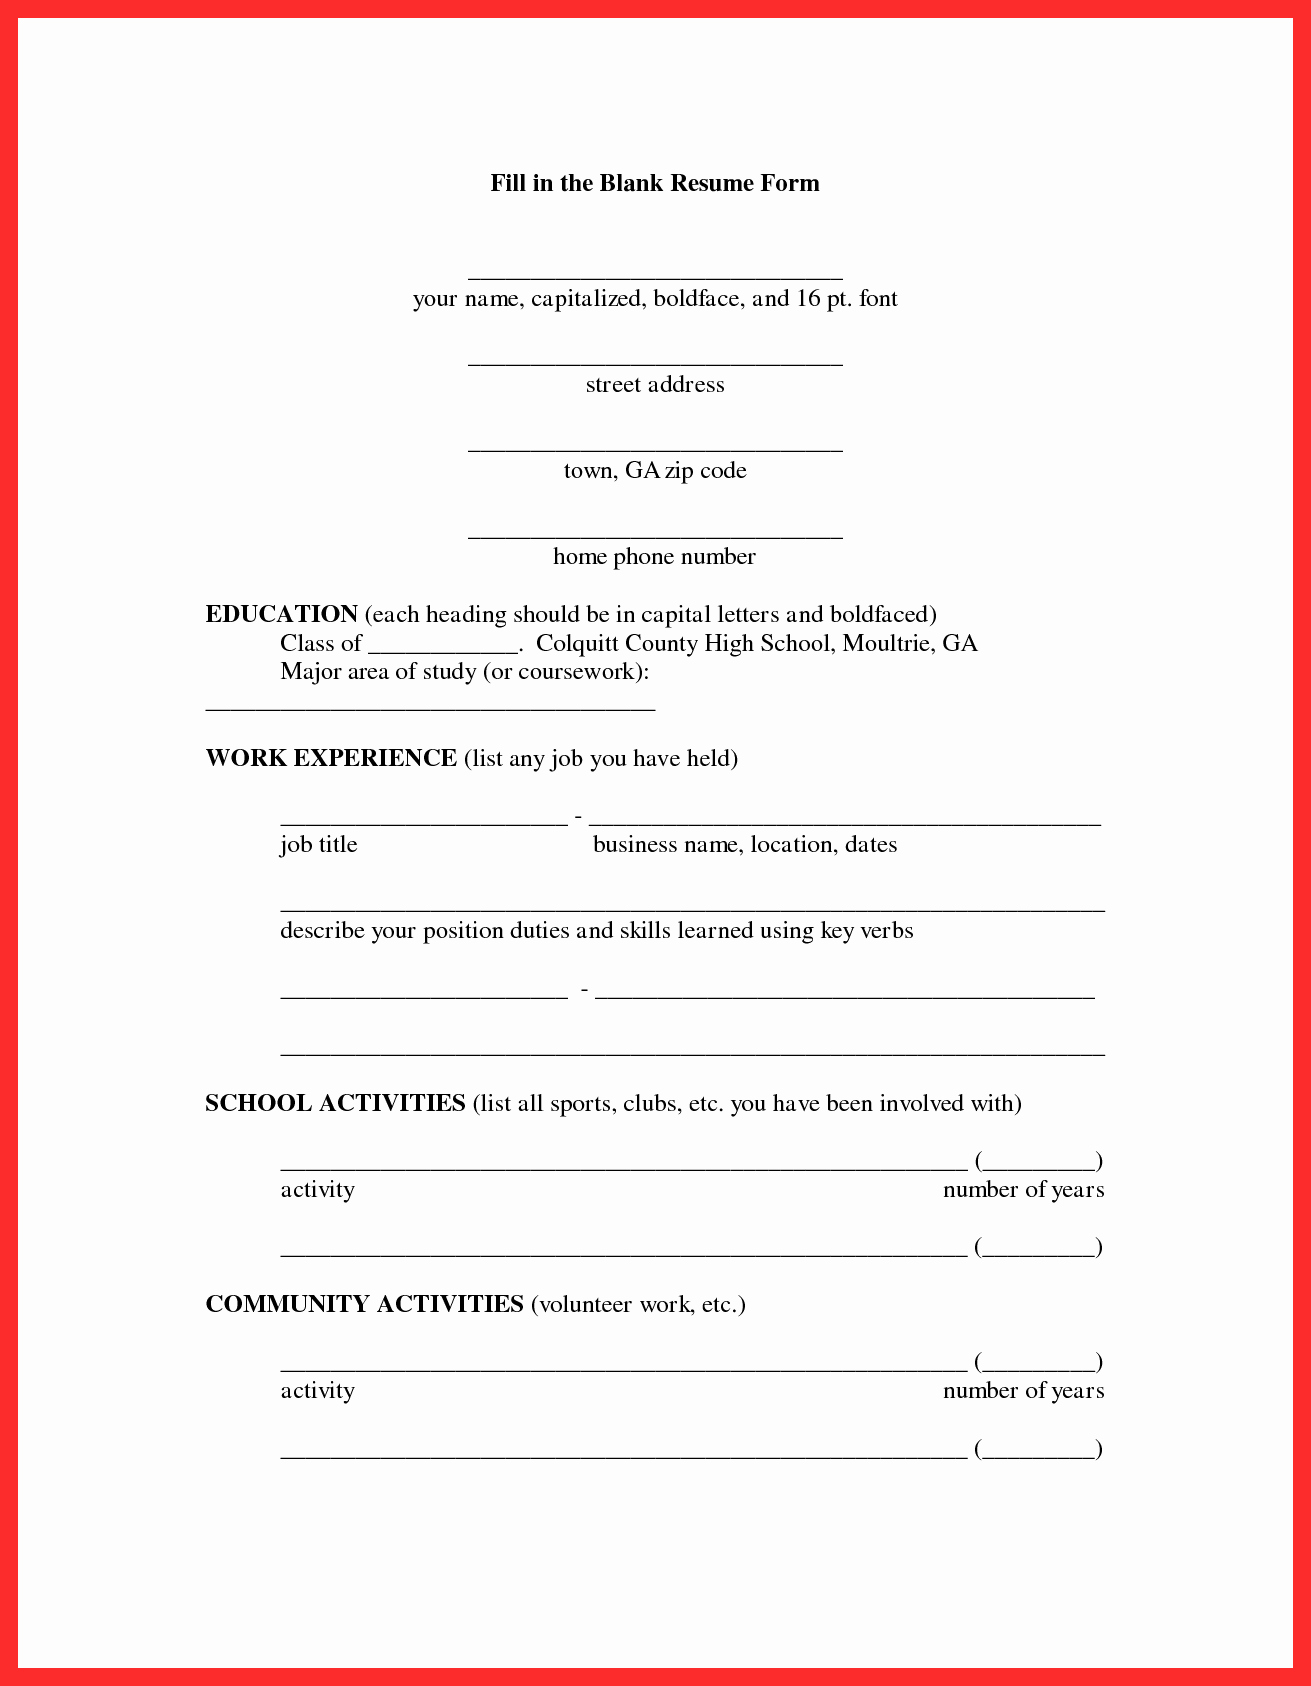 Fill In Resume Template Free Unique Fill In Resume form